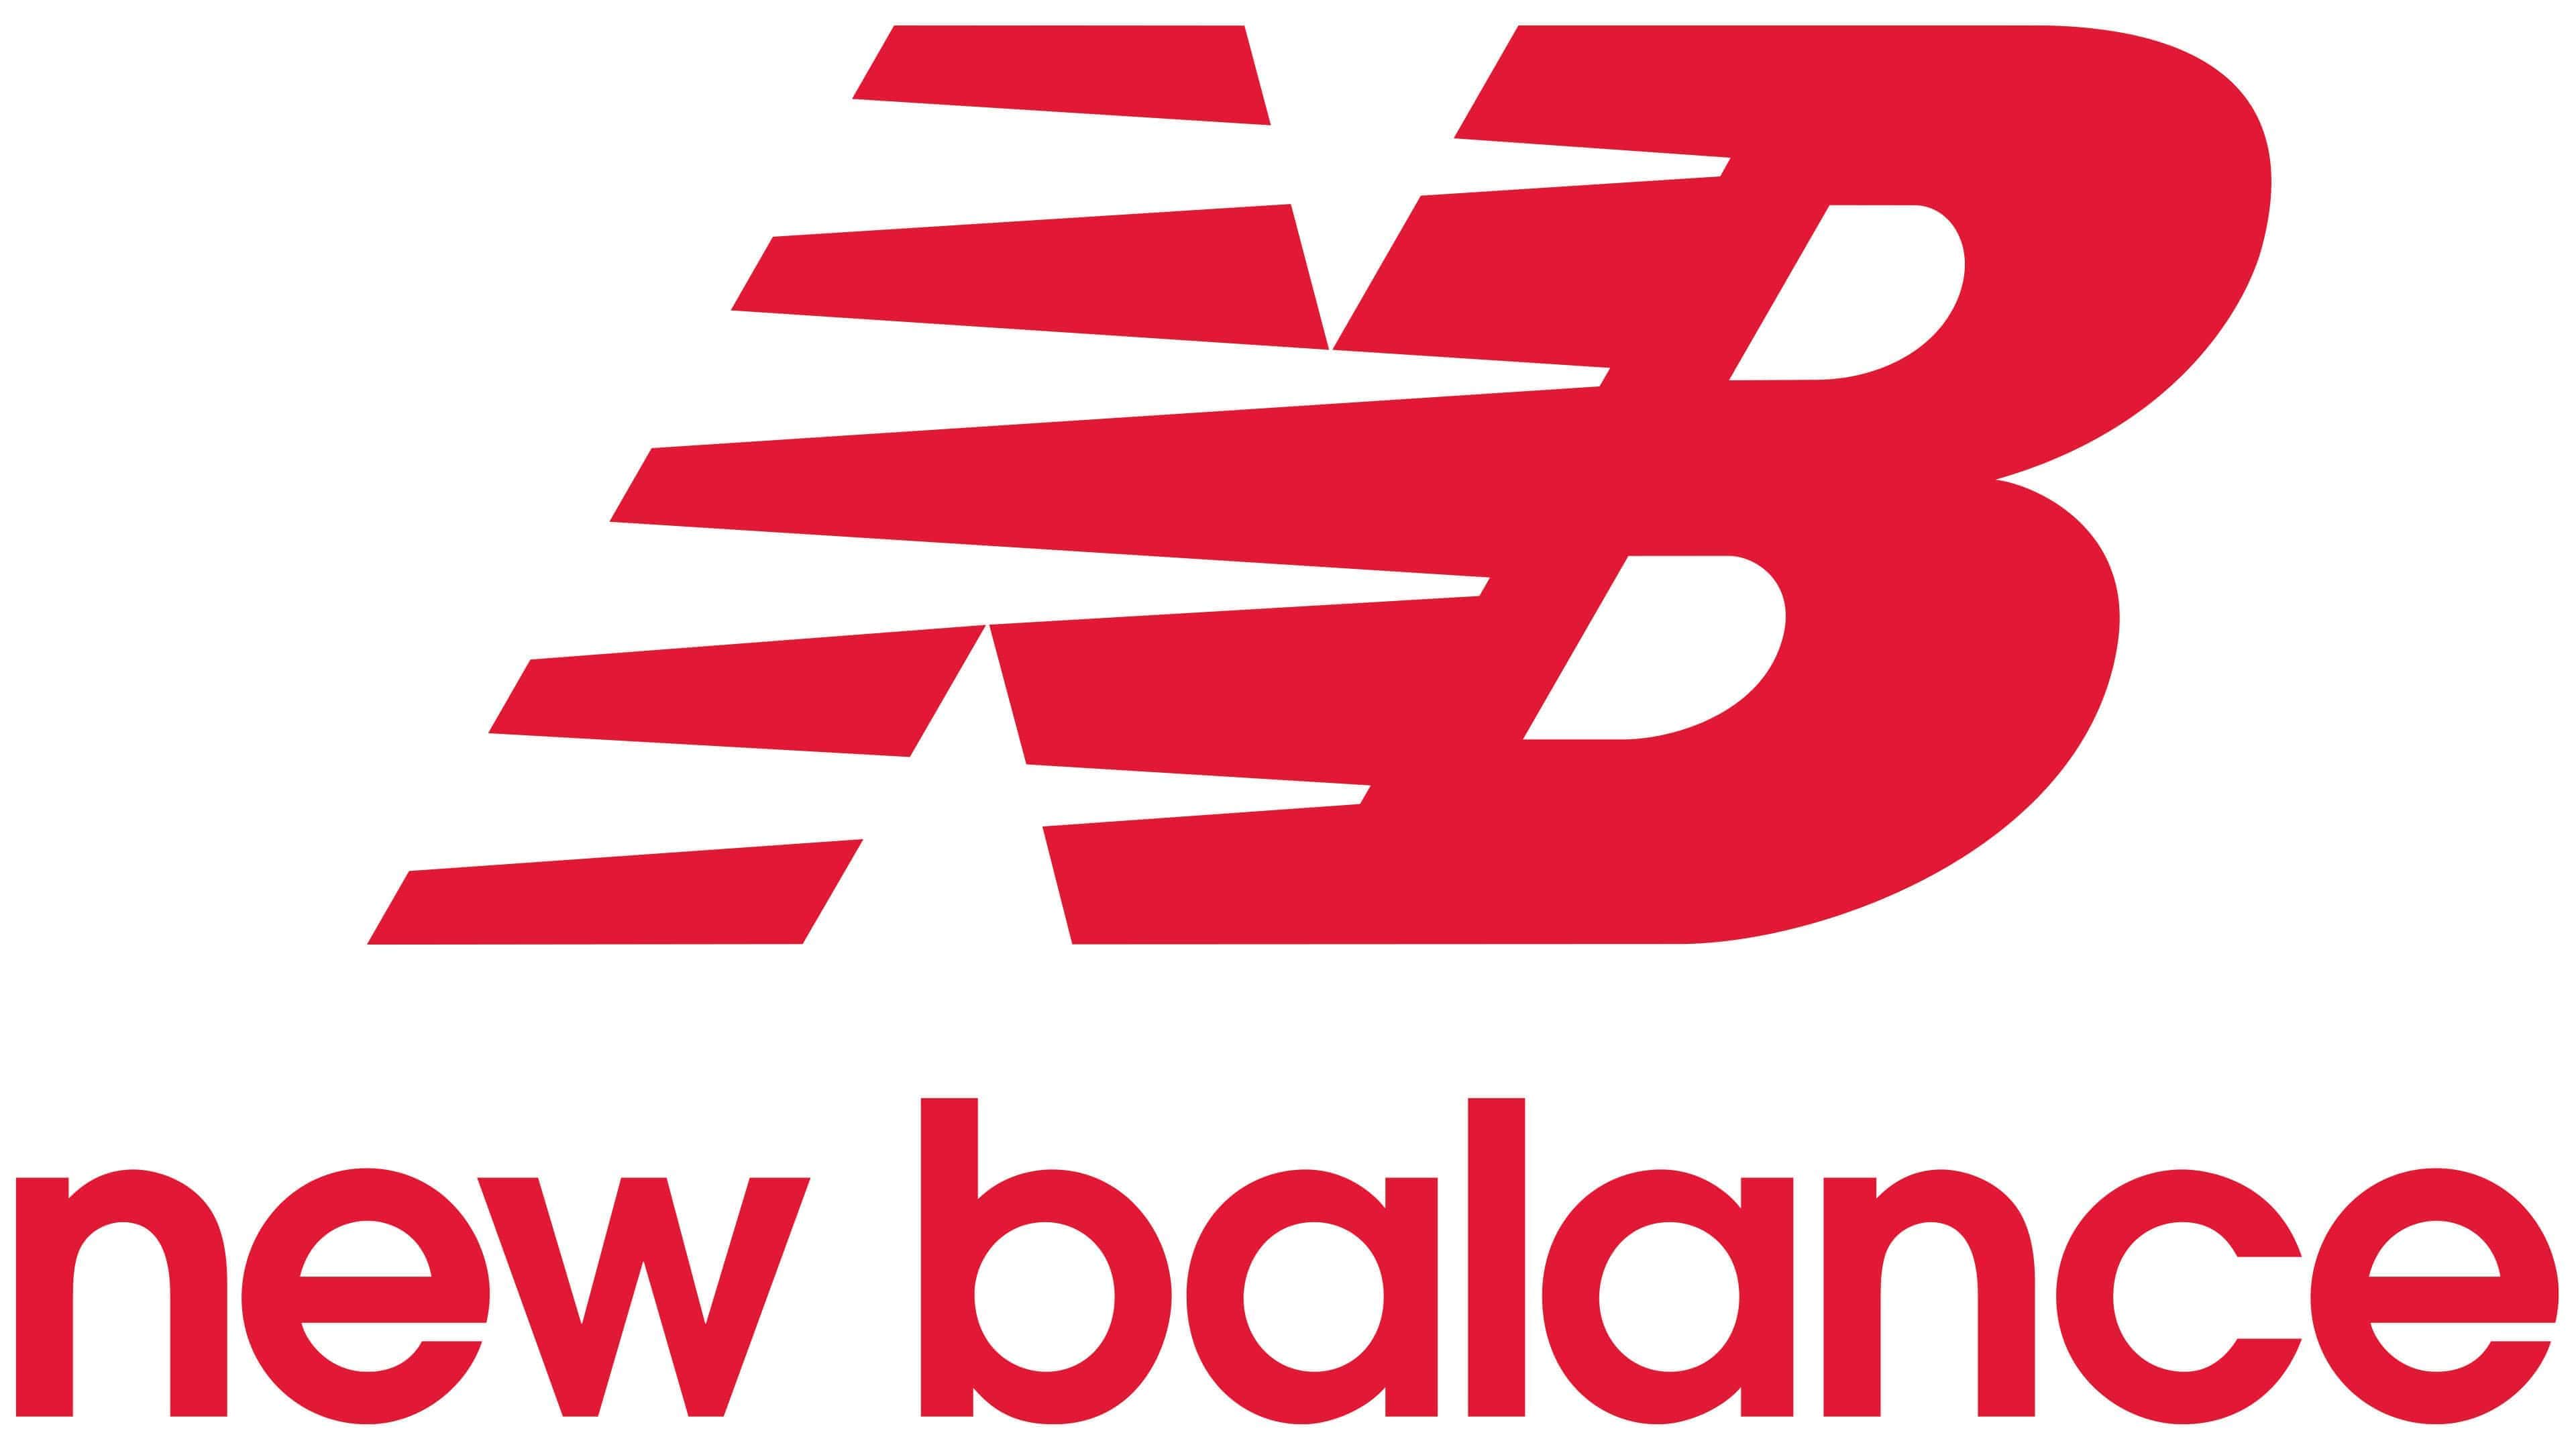 New Balance meaning, PNG, brand